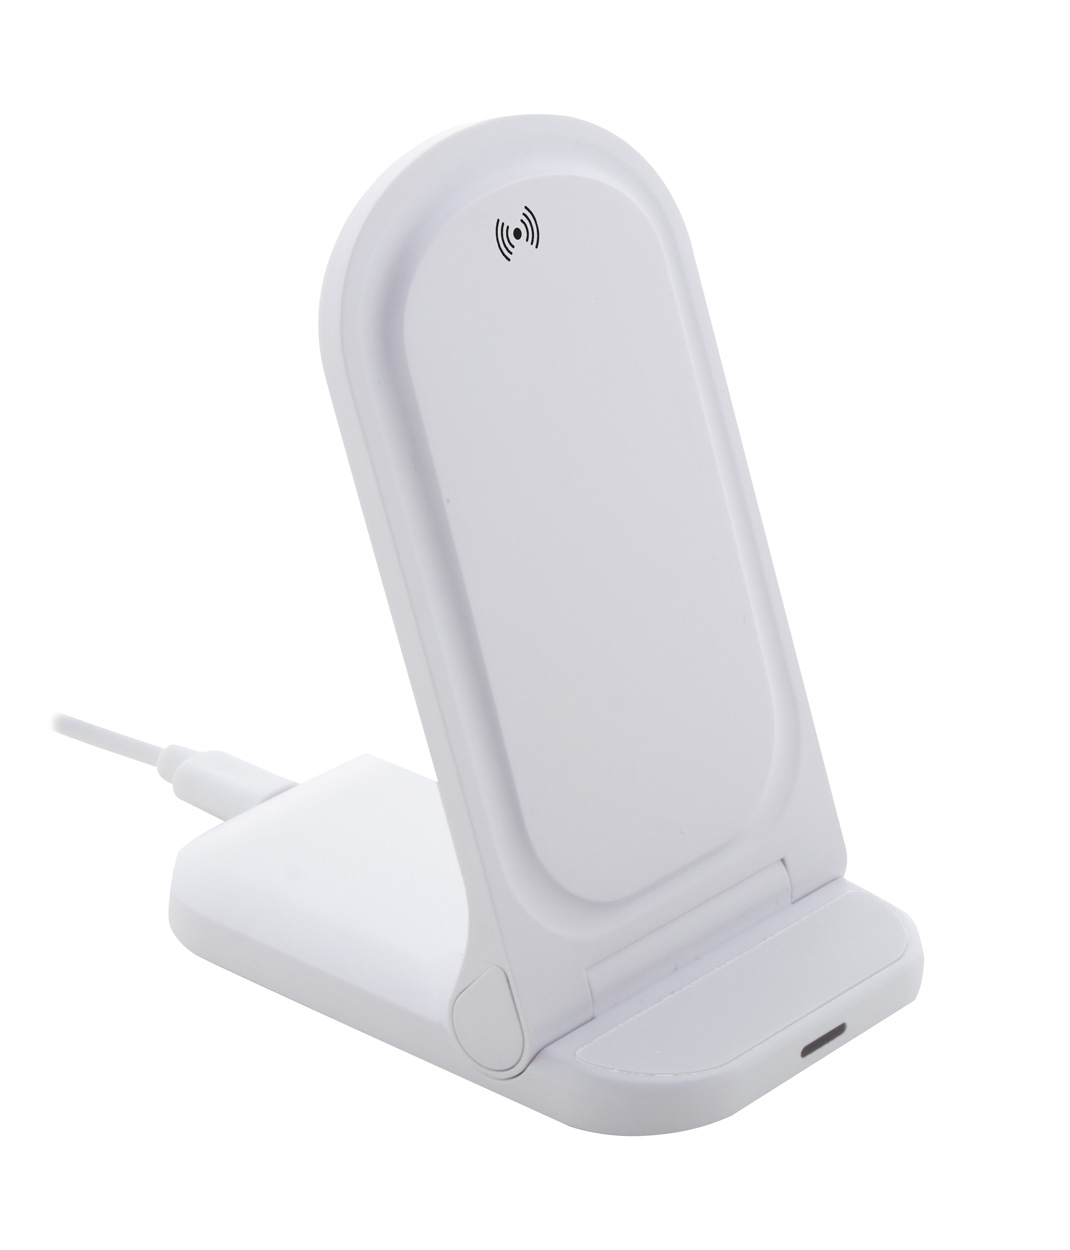 Promo Rewolt RABS wireless charger mobile holder